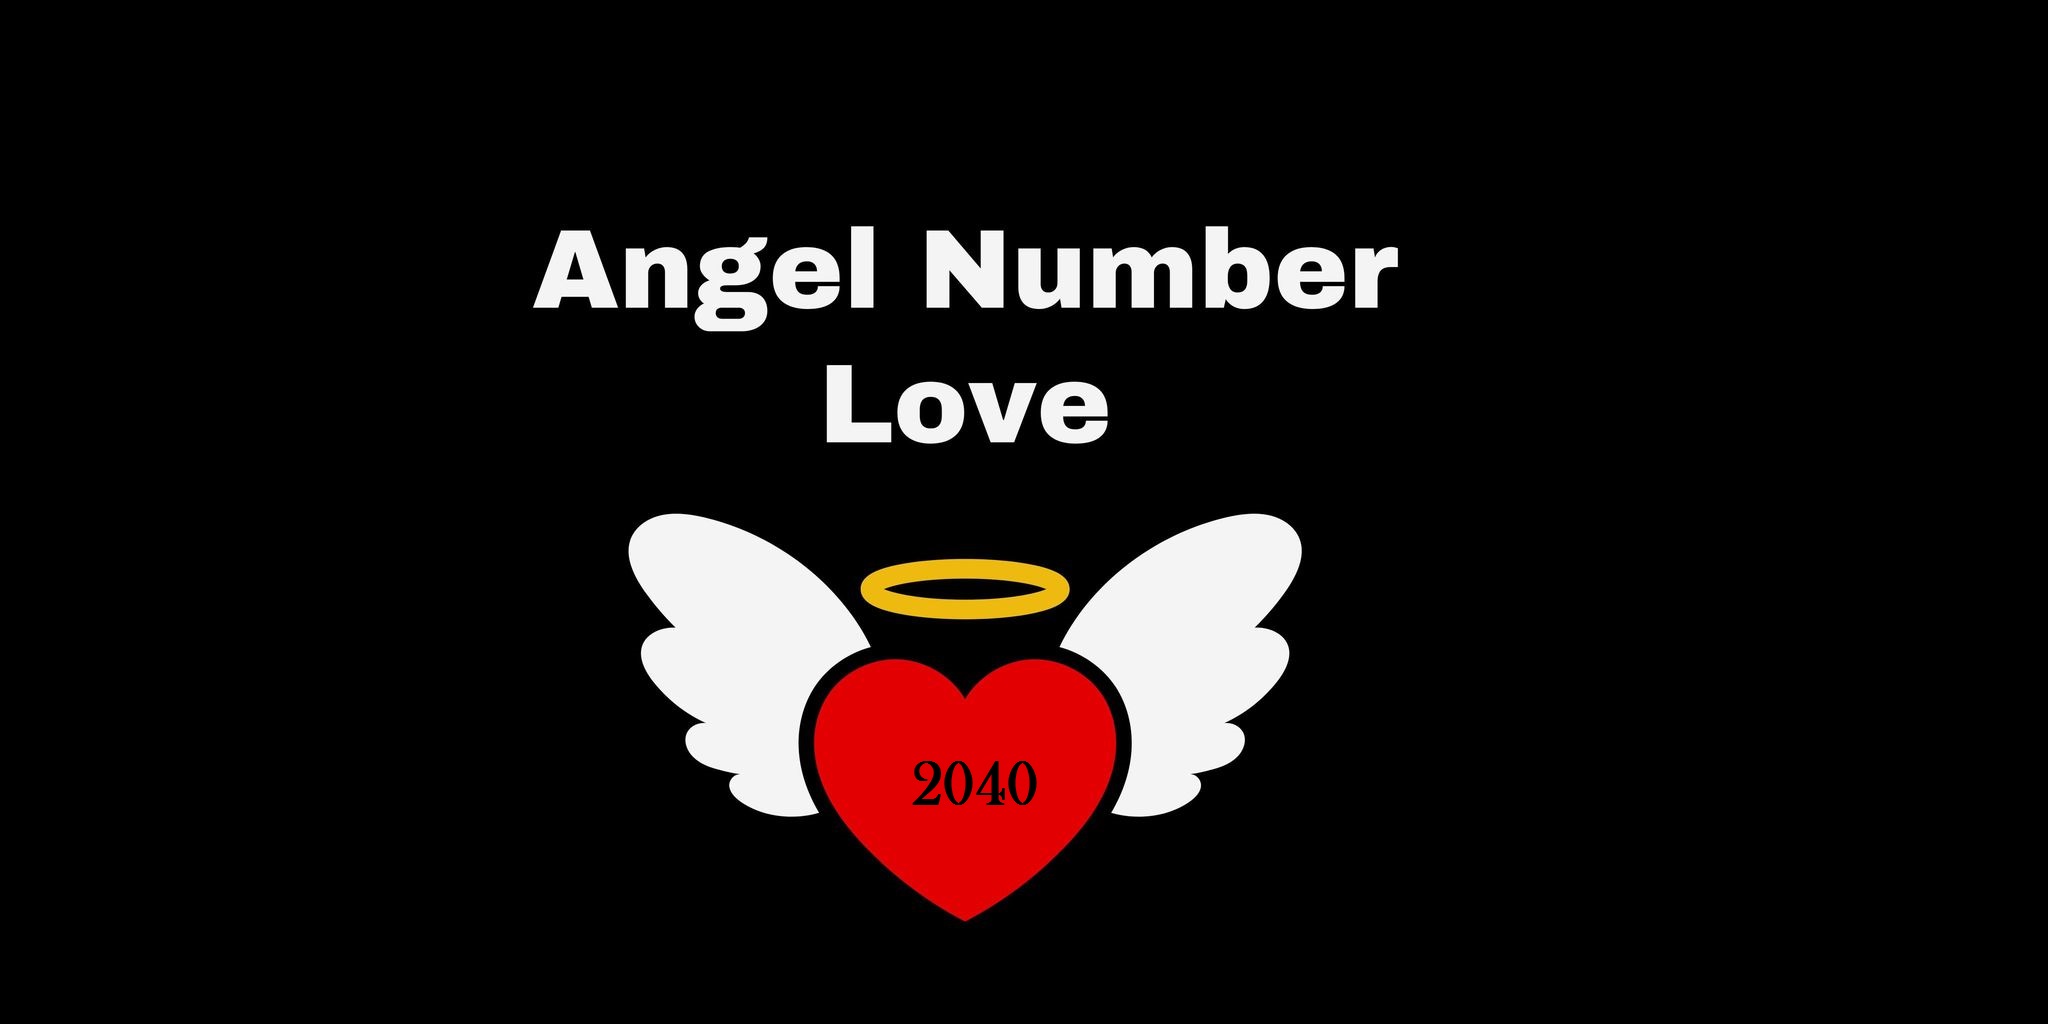 2040 Angel Number Meaning In Love